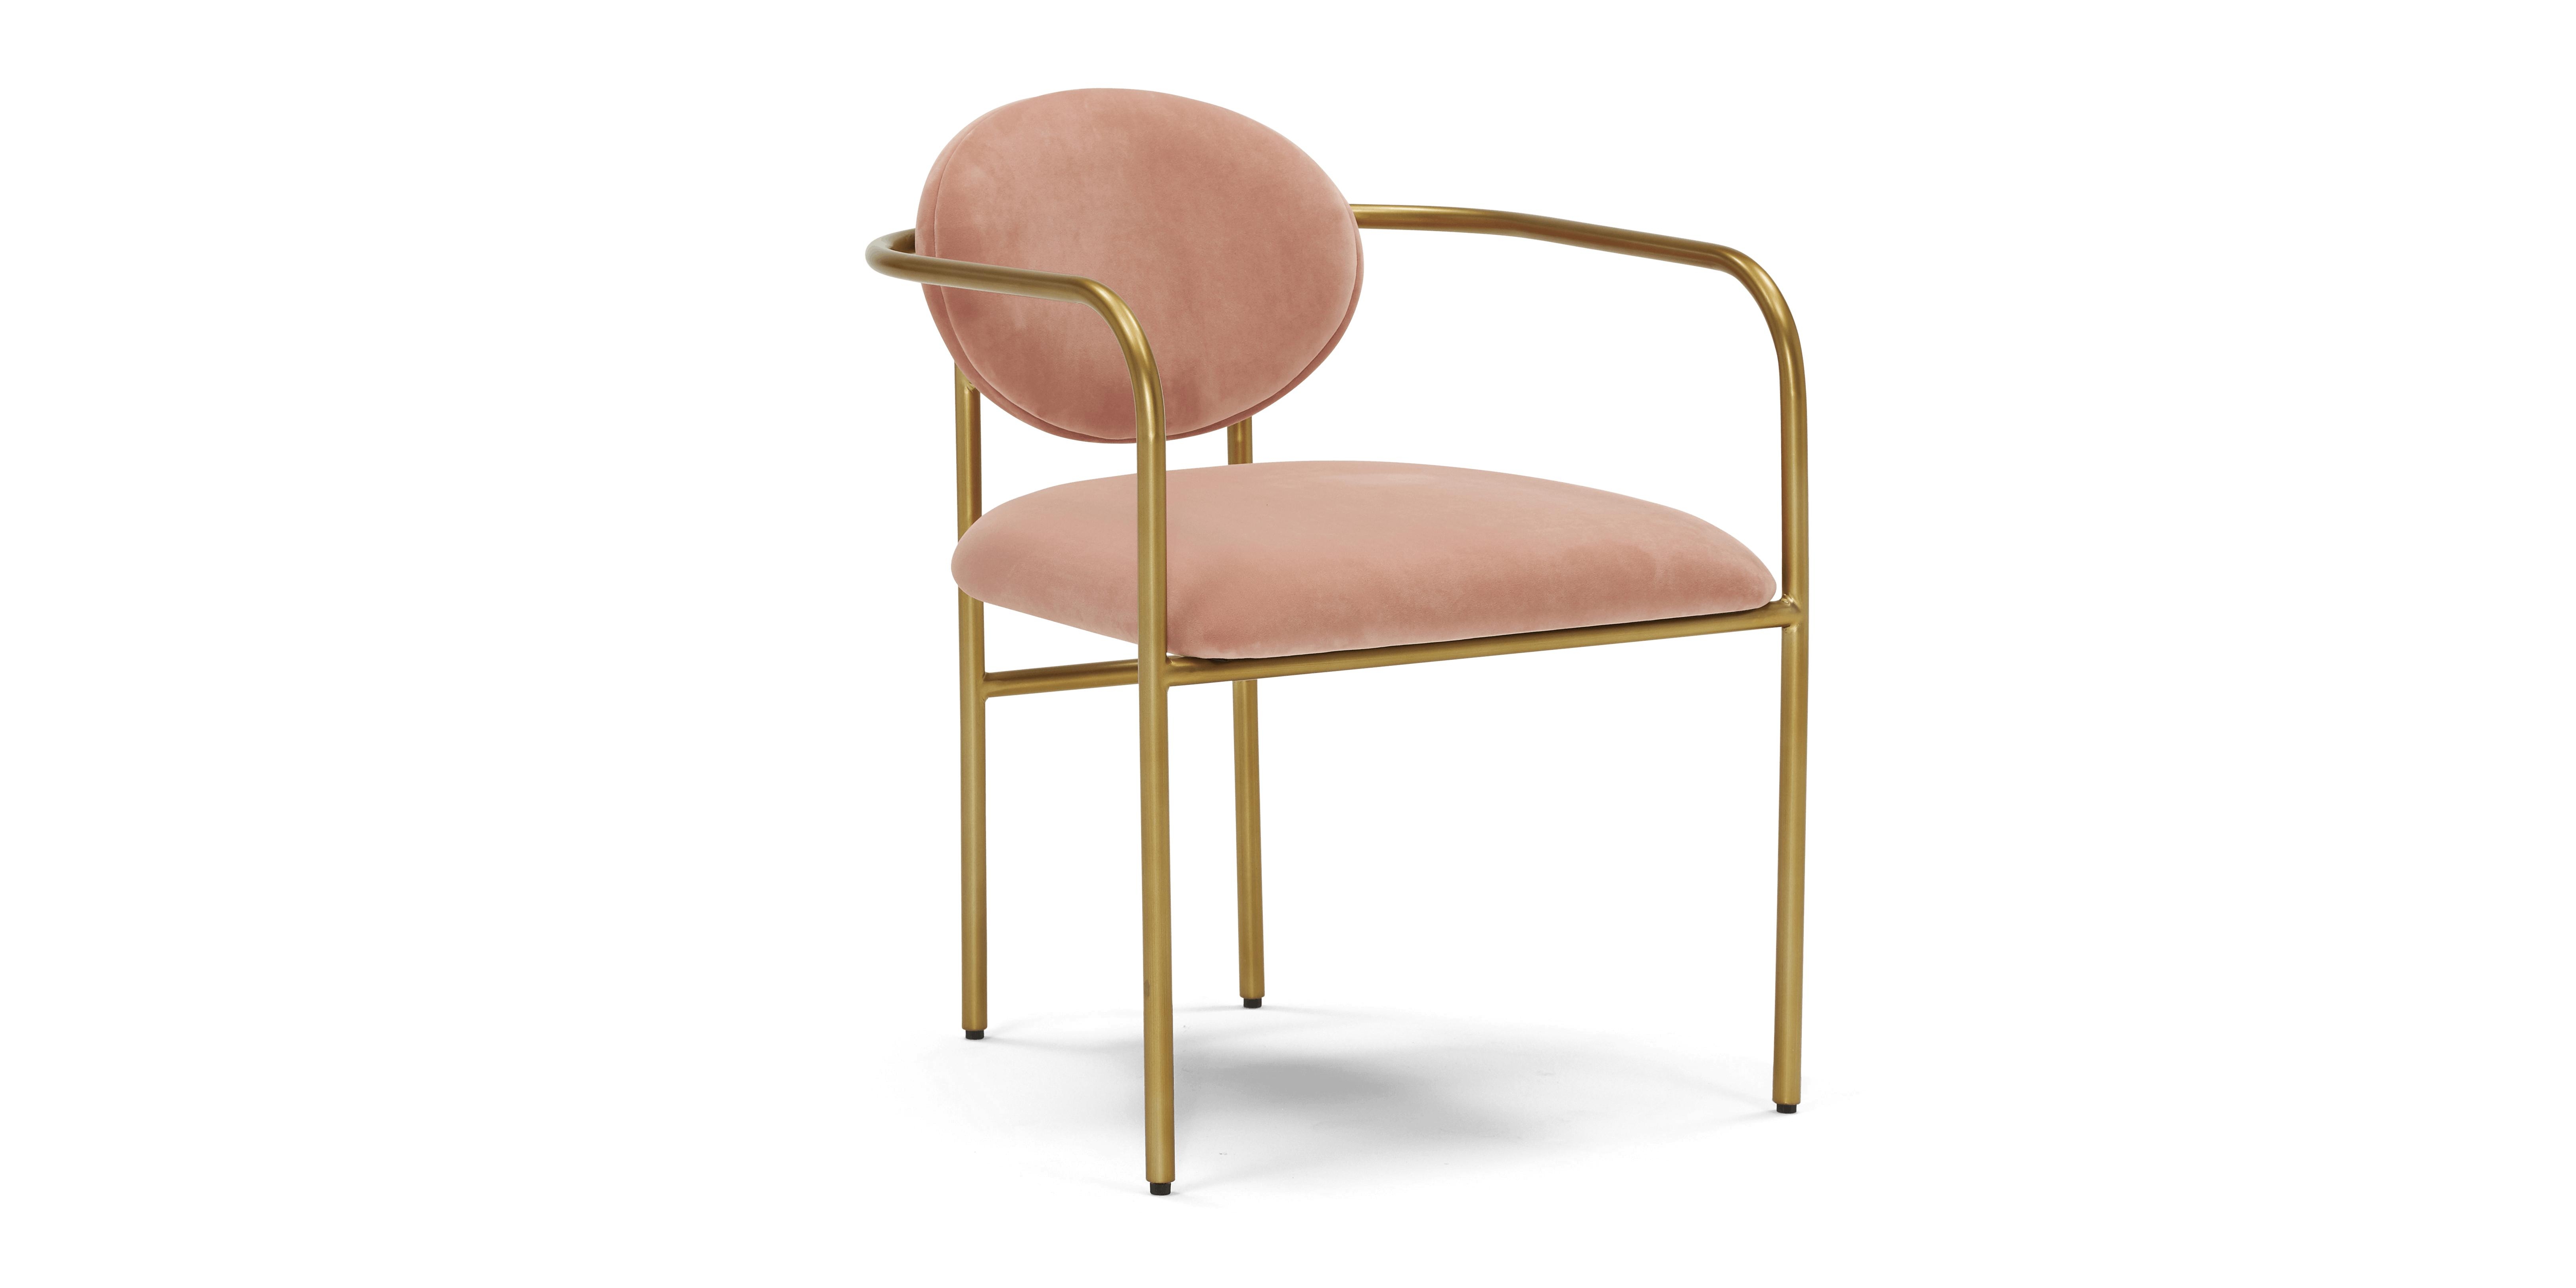 Pink Soleil Mid Century Modern Dining Chair - Royale Blush - Image 1